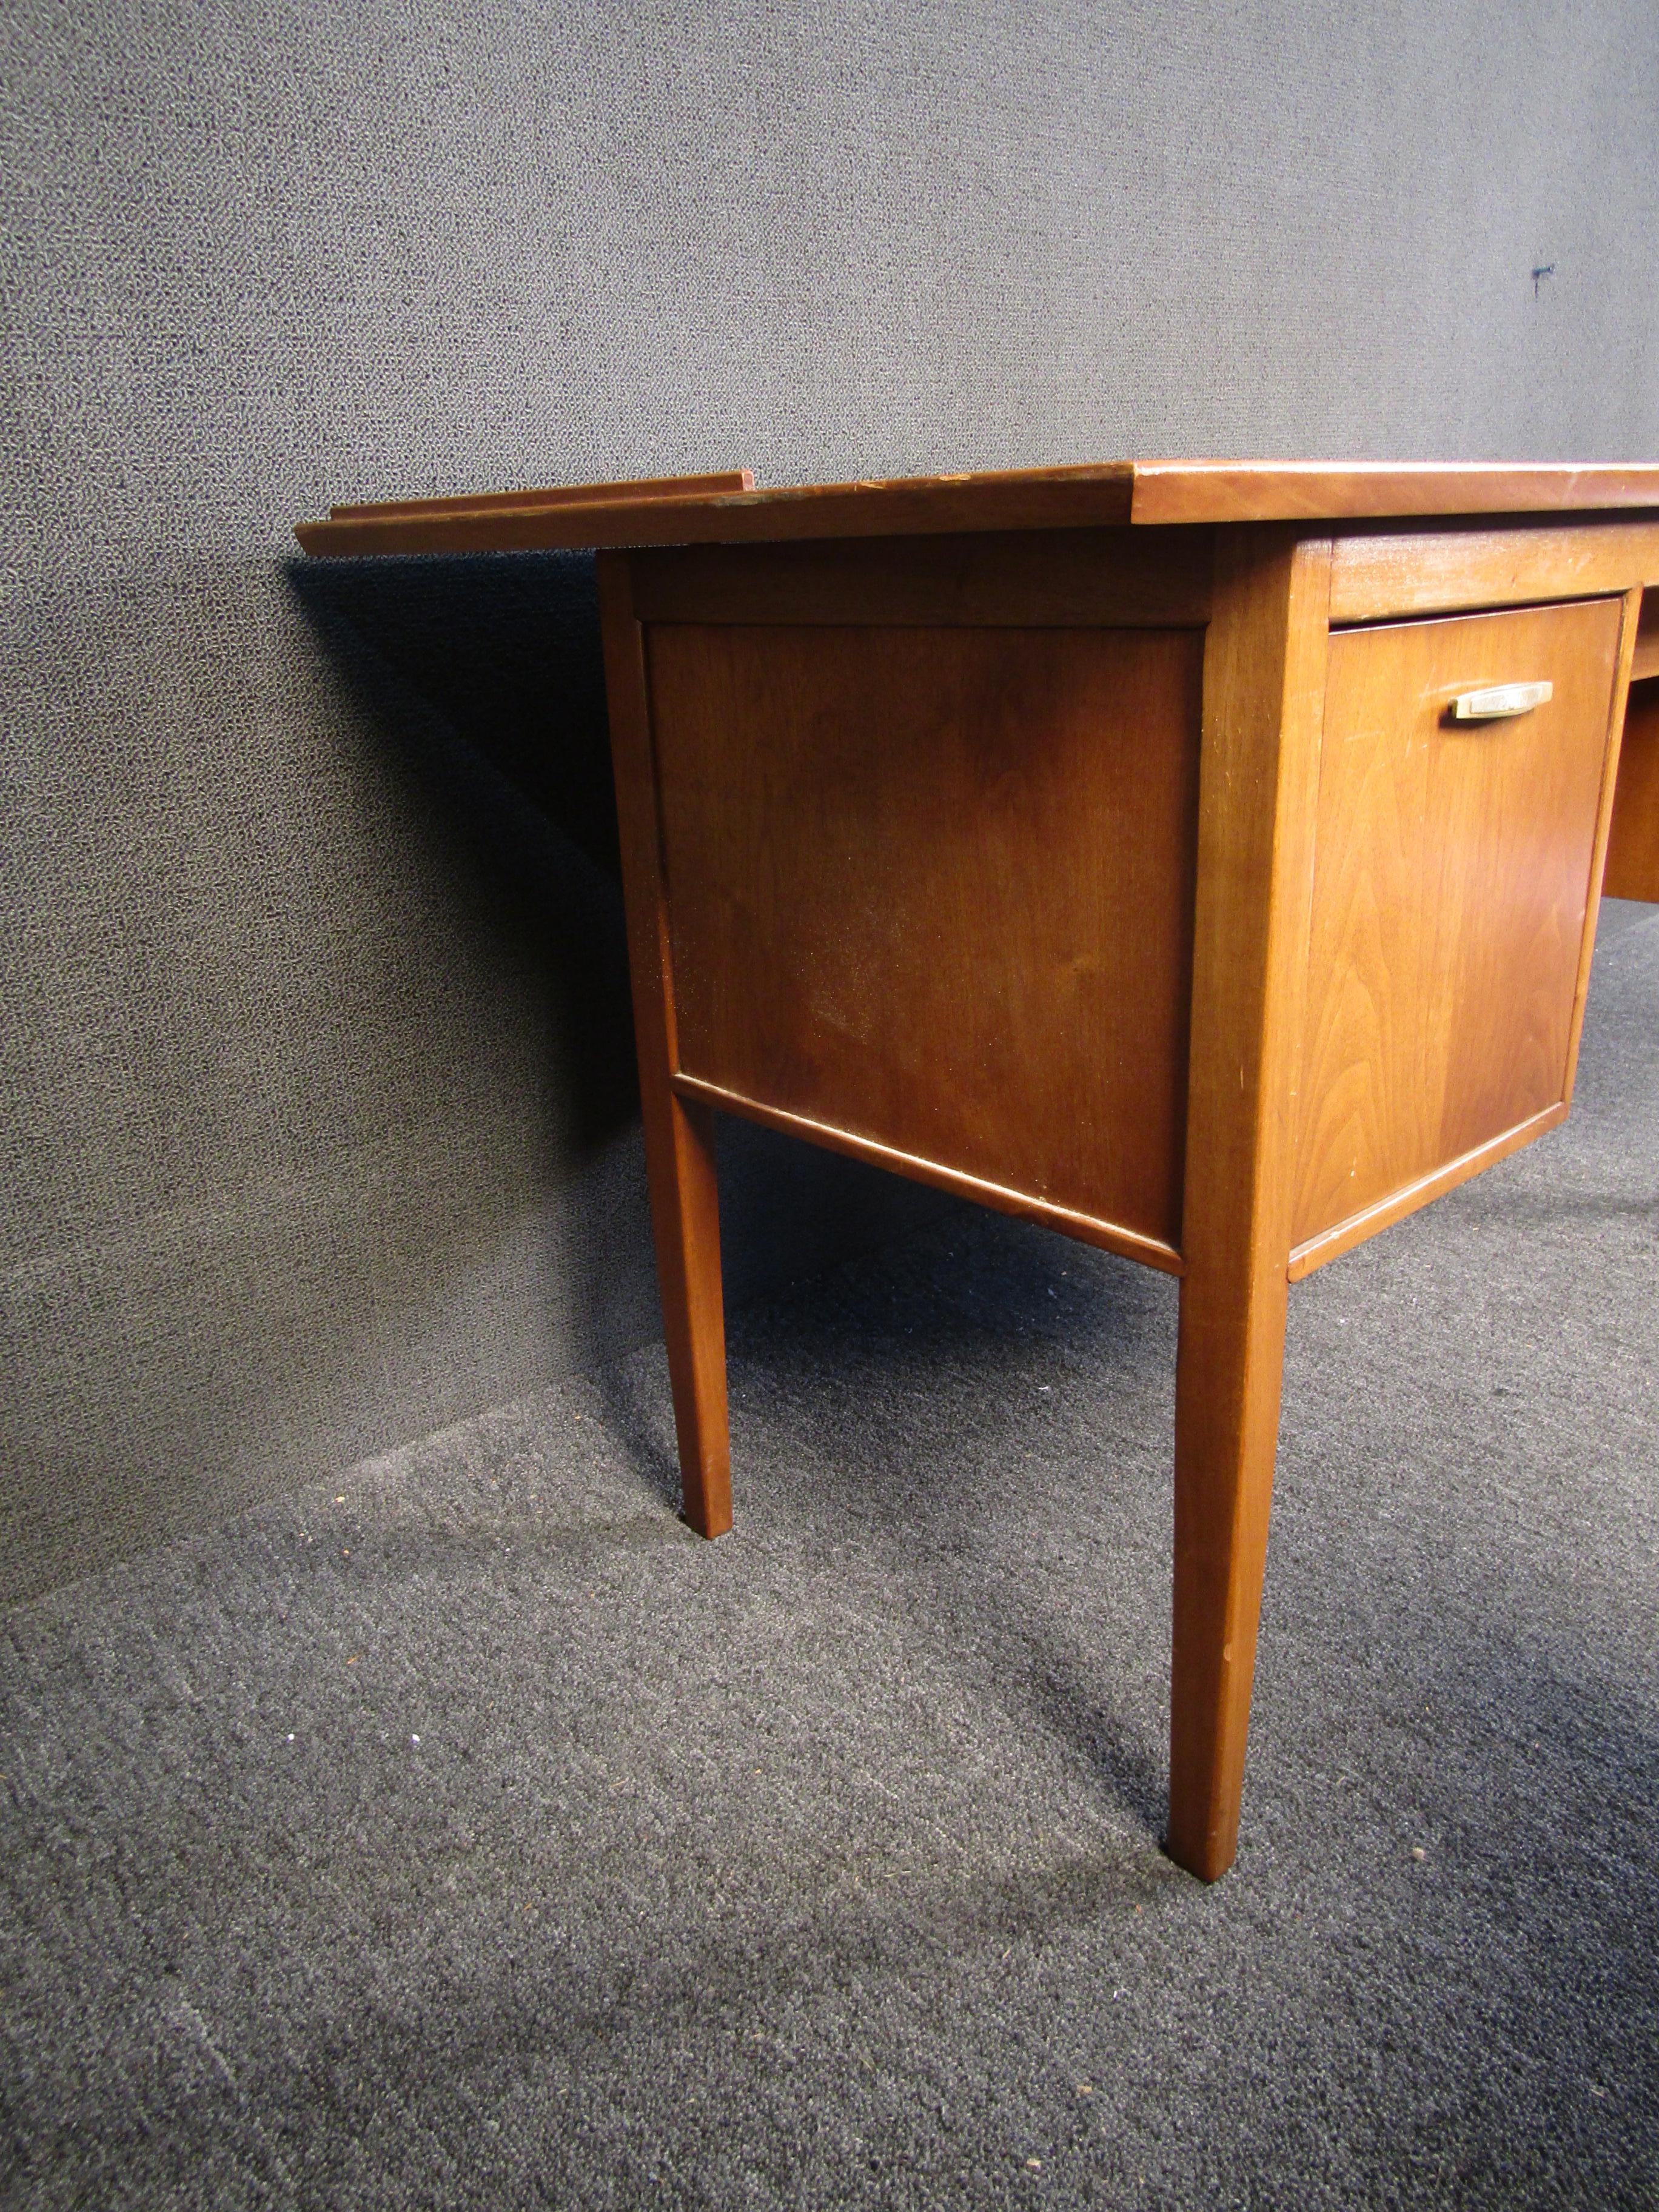 maple desk with drawers